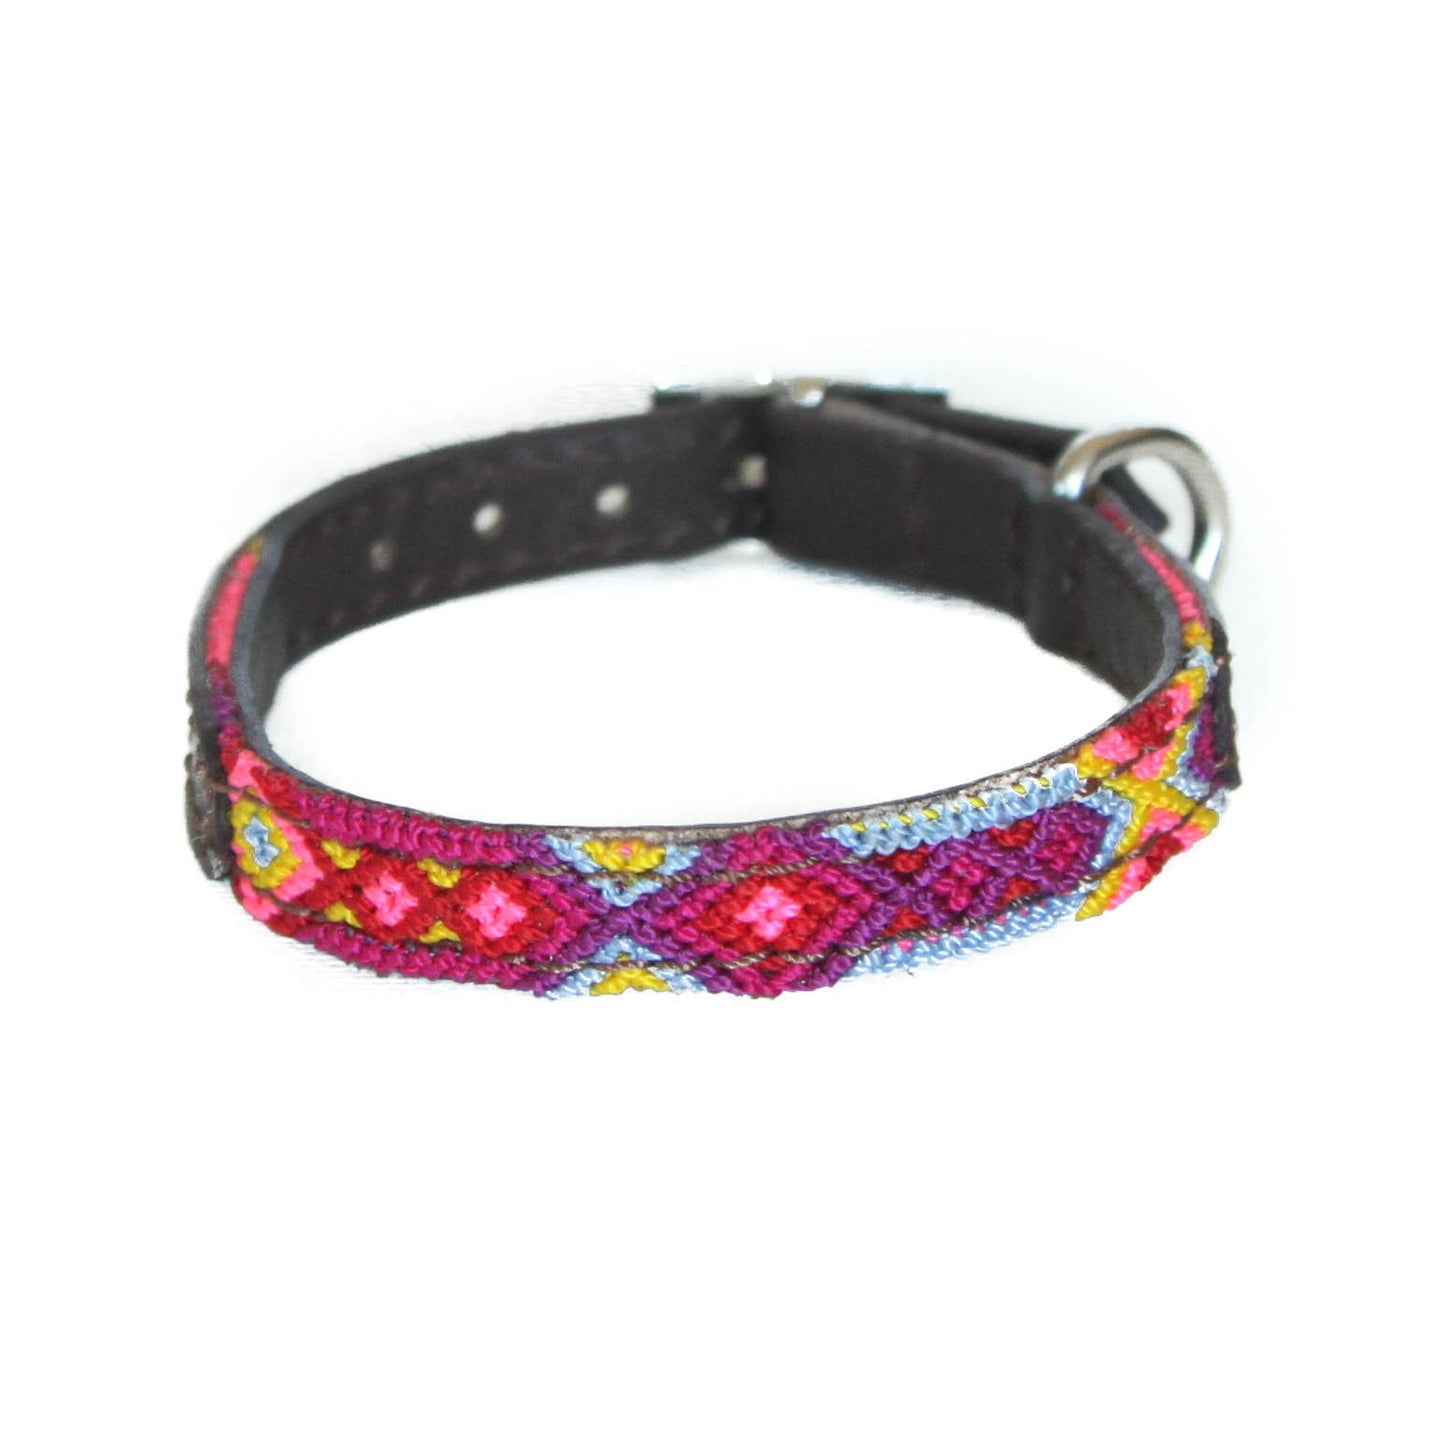 Coral - Embroidered Dog Collar With Leather